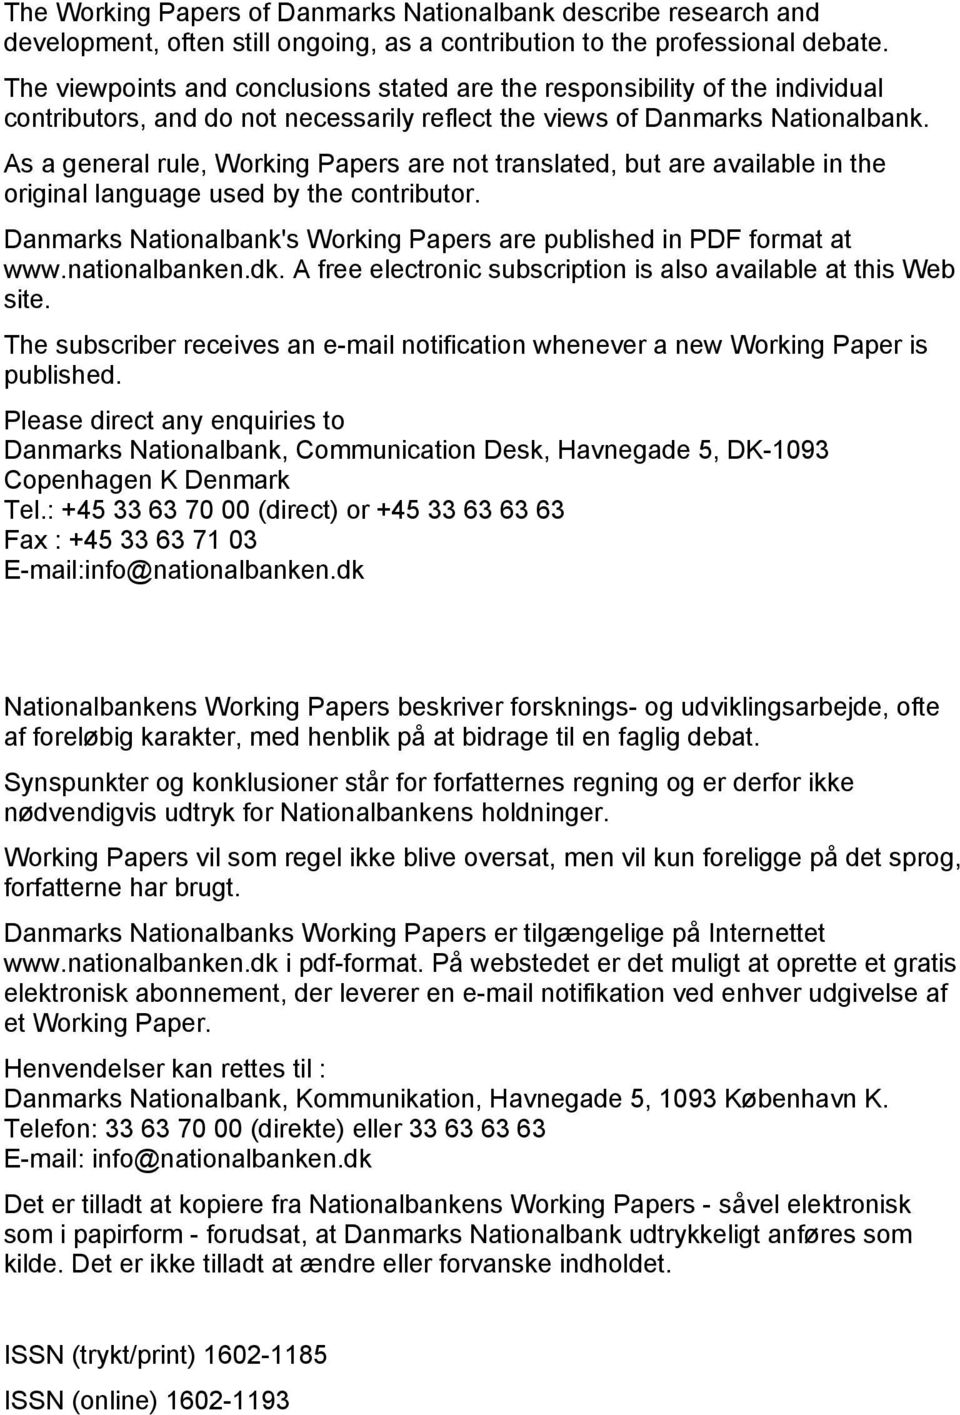 As a general rule, Working Papers are not translated, but are available in the original language used by the contributor. Danmarks Nationalbank's Working Papers are published in PDF format at www.